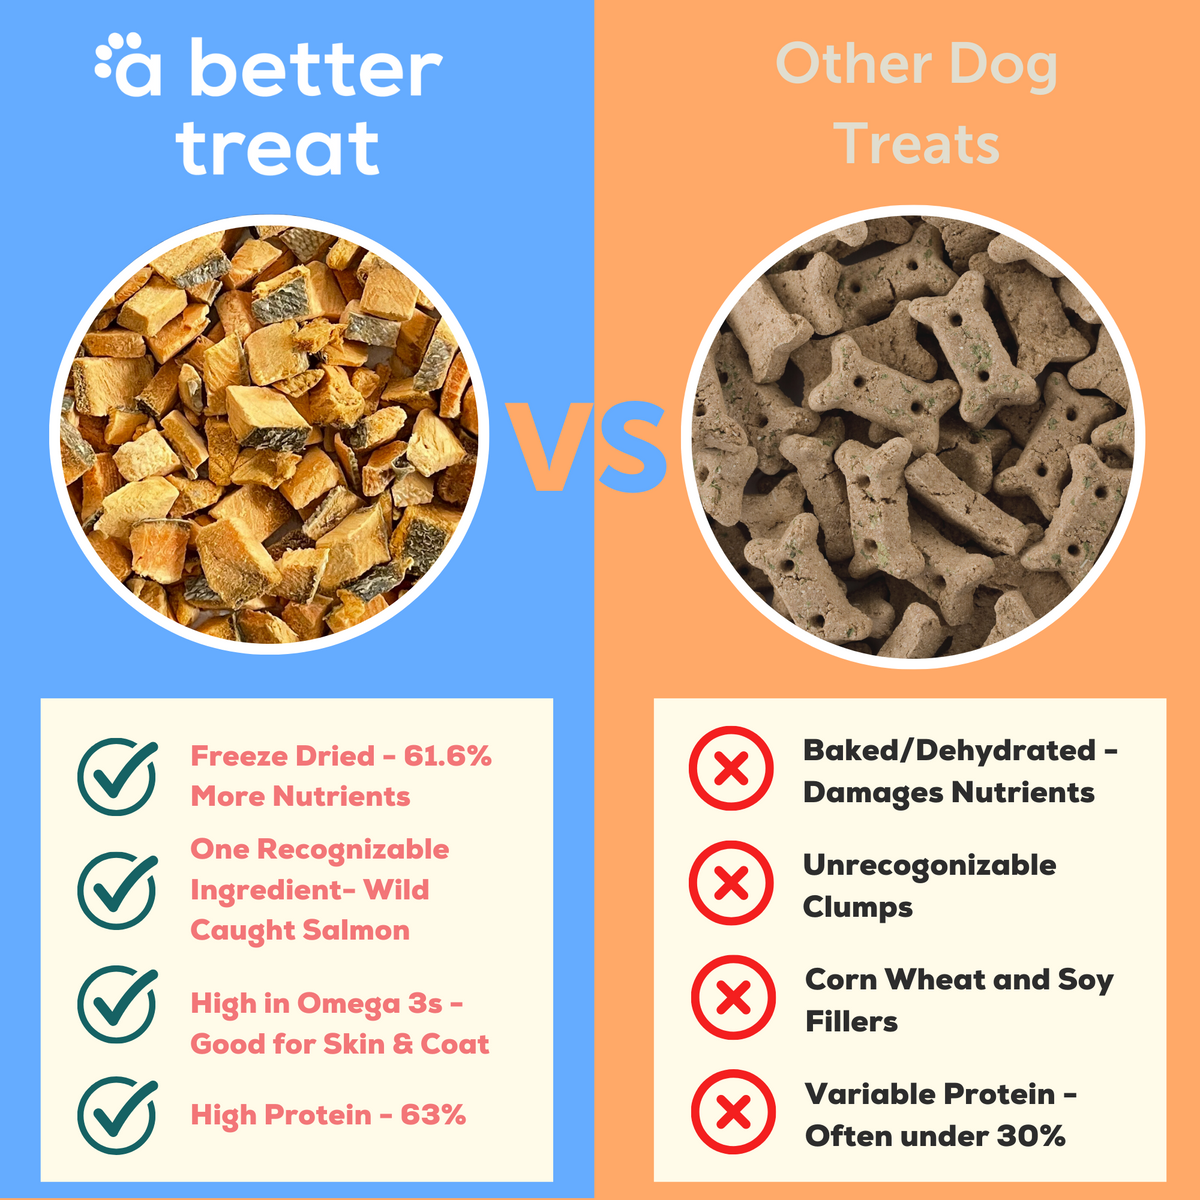 is freeze dried dog food better than dehydrated